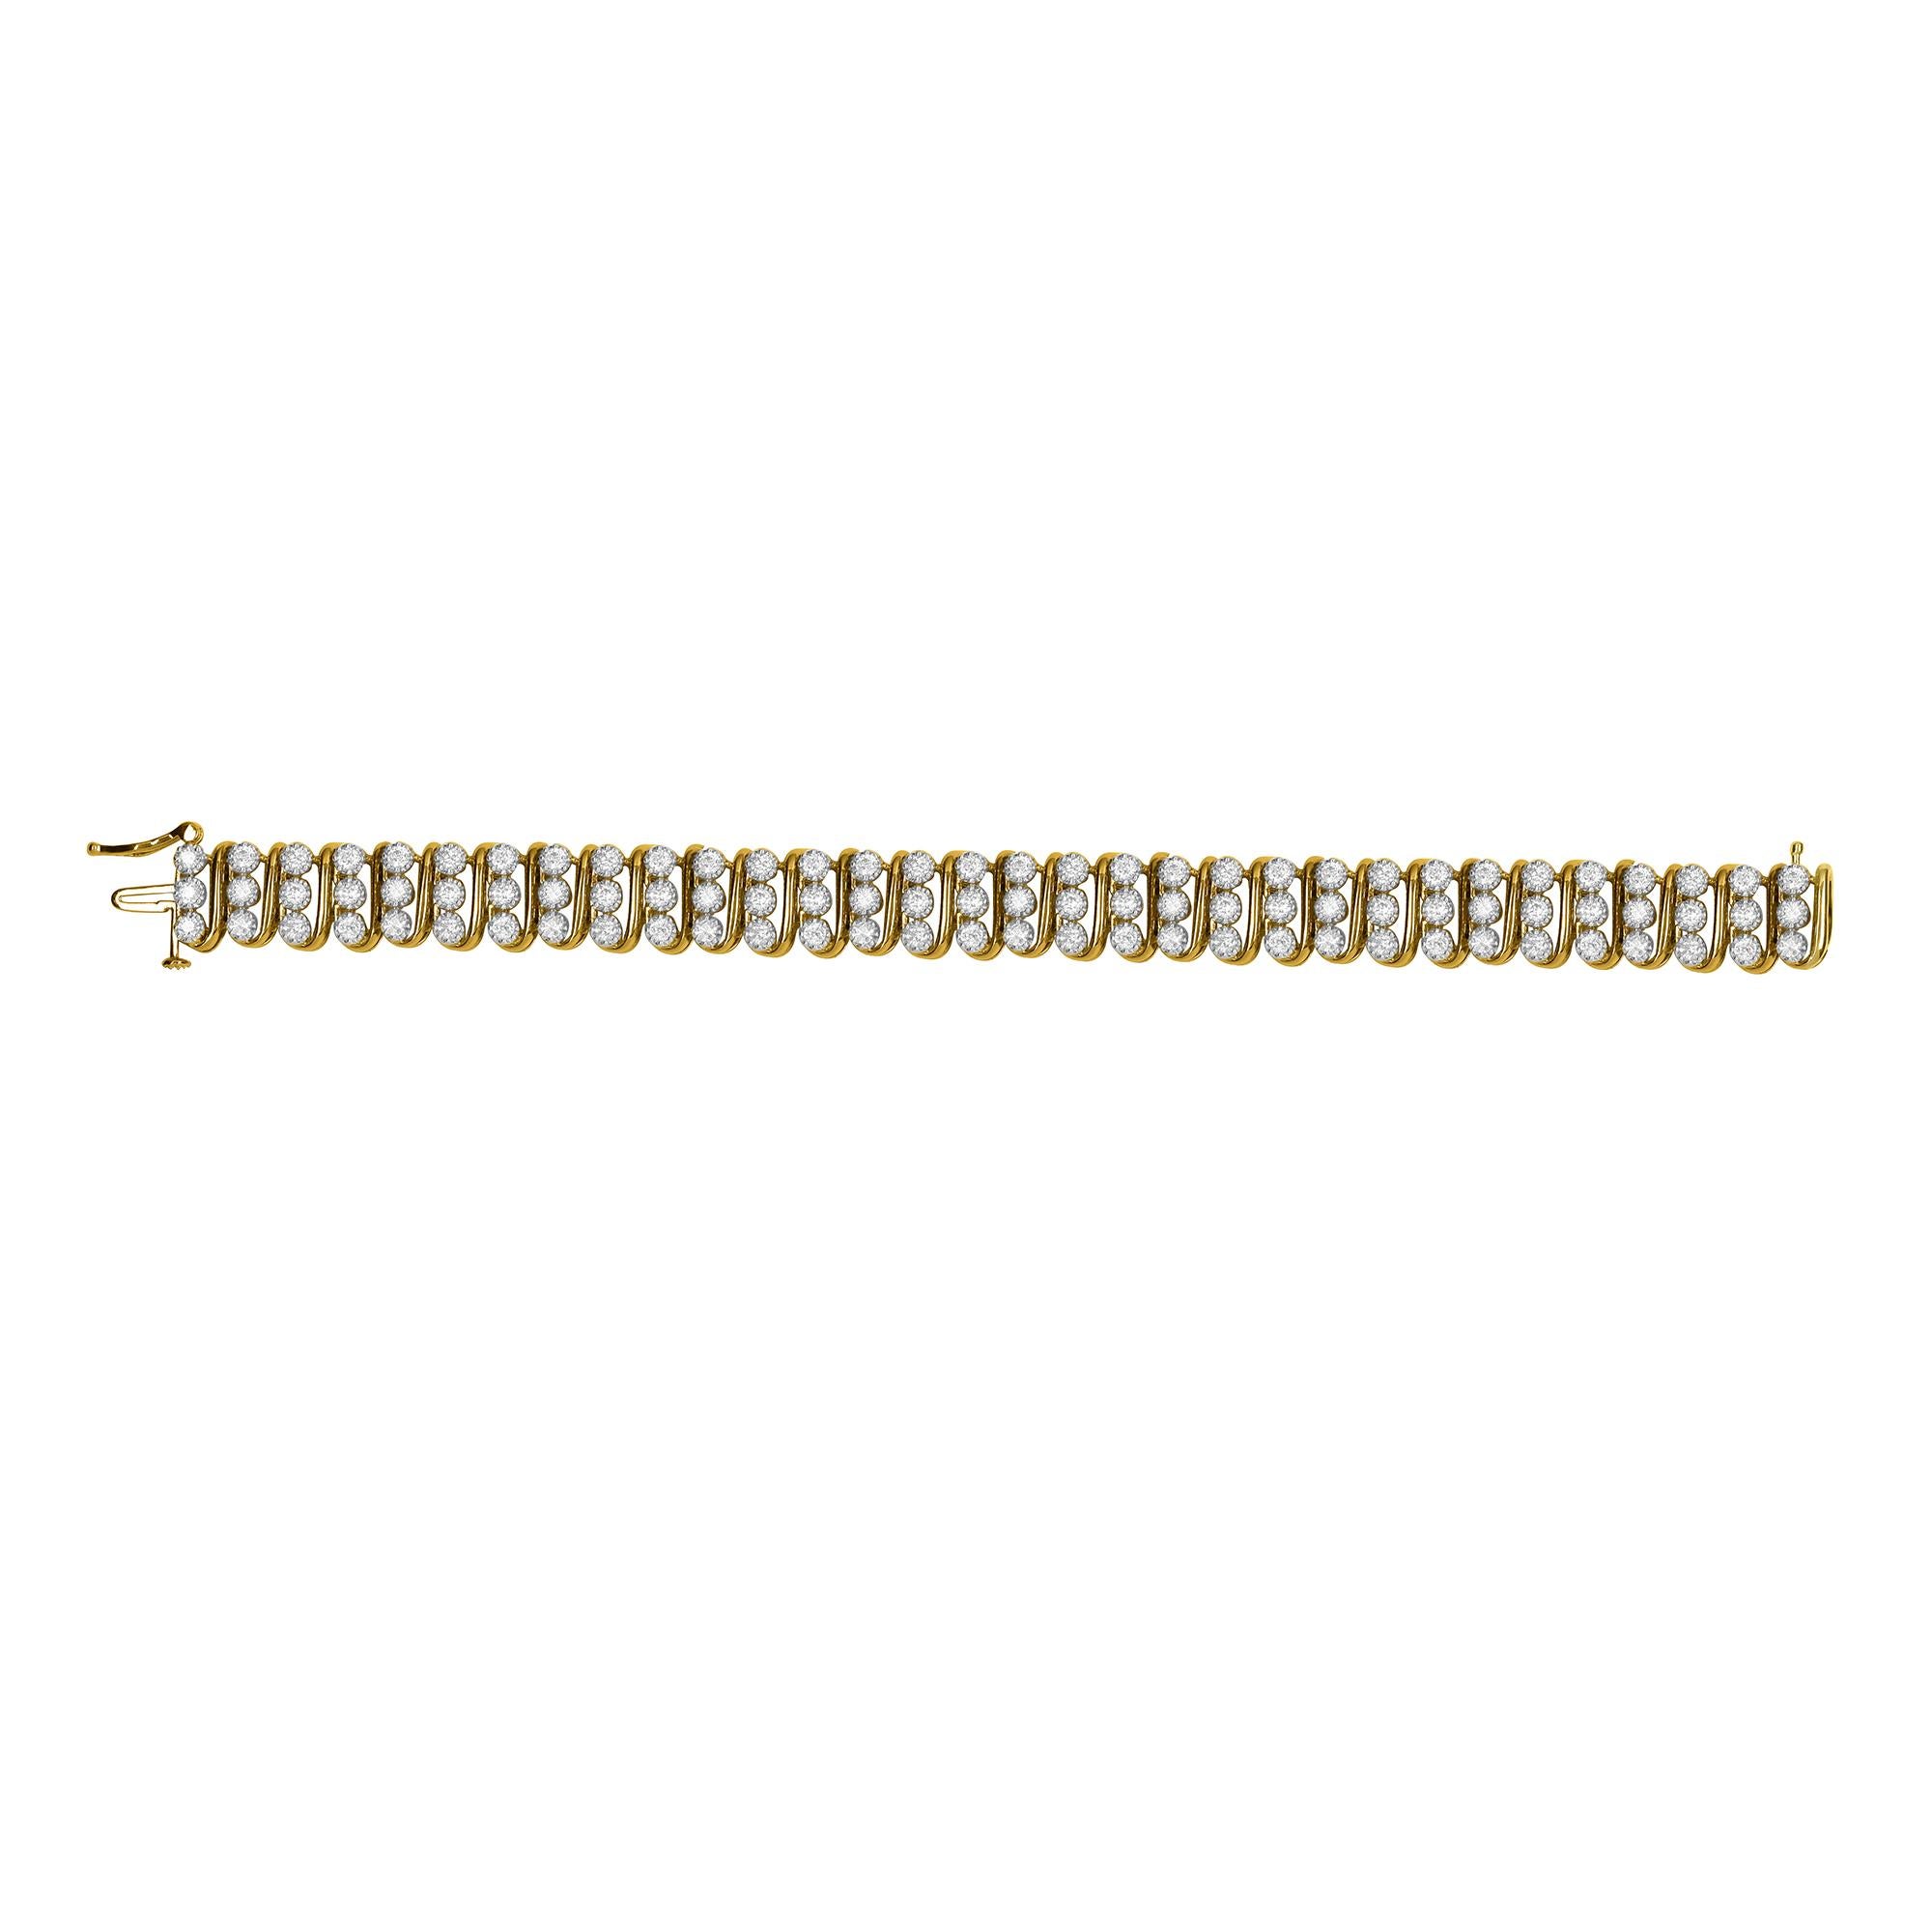 With a cascade of shimmer, this diamond bracelet draws all the right kind of attention. Crafted in 14 karat yellow gold, this gleaming look features 'S' shaped links and it features 96 round brilliant-cut diamond in prong setting. The total diamond